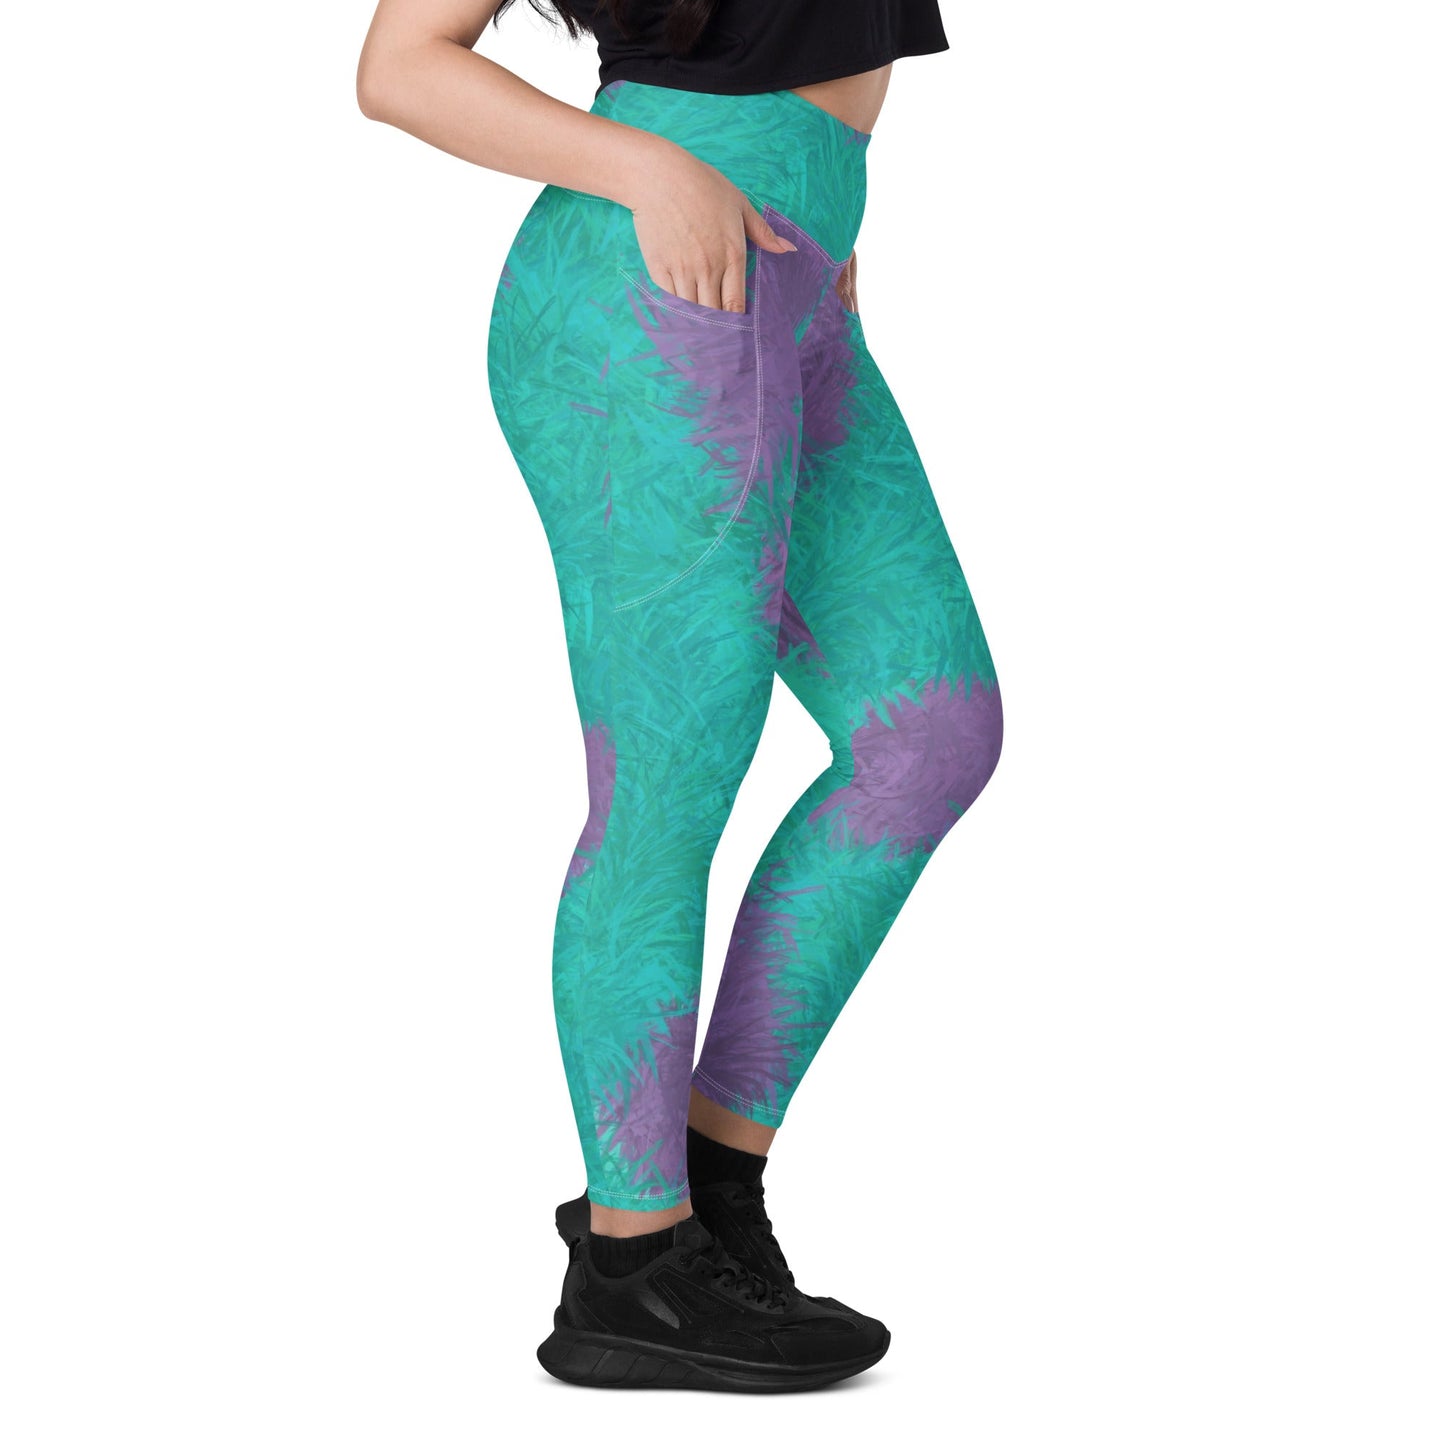 Kitty! Leggings with pockets crowned athleticdisney adultdisney adult leggings#tag4##tag5##tag6#